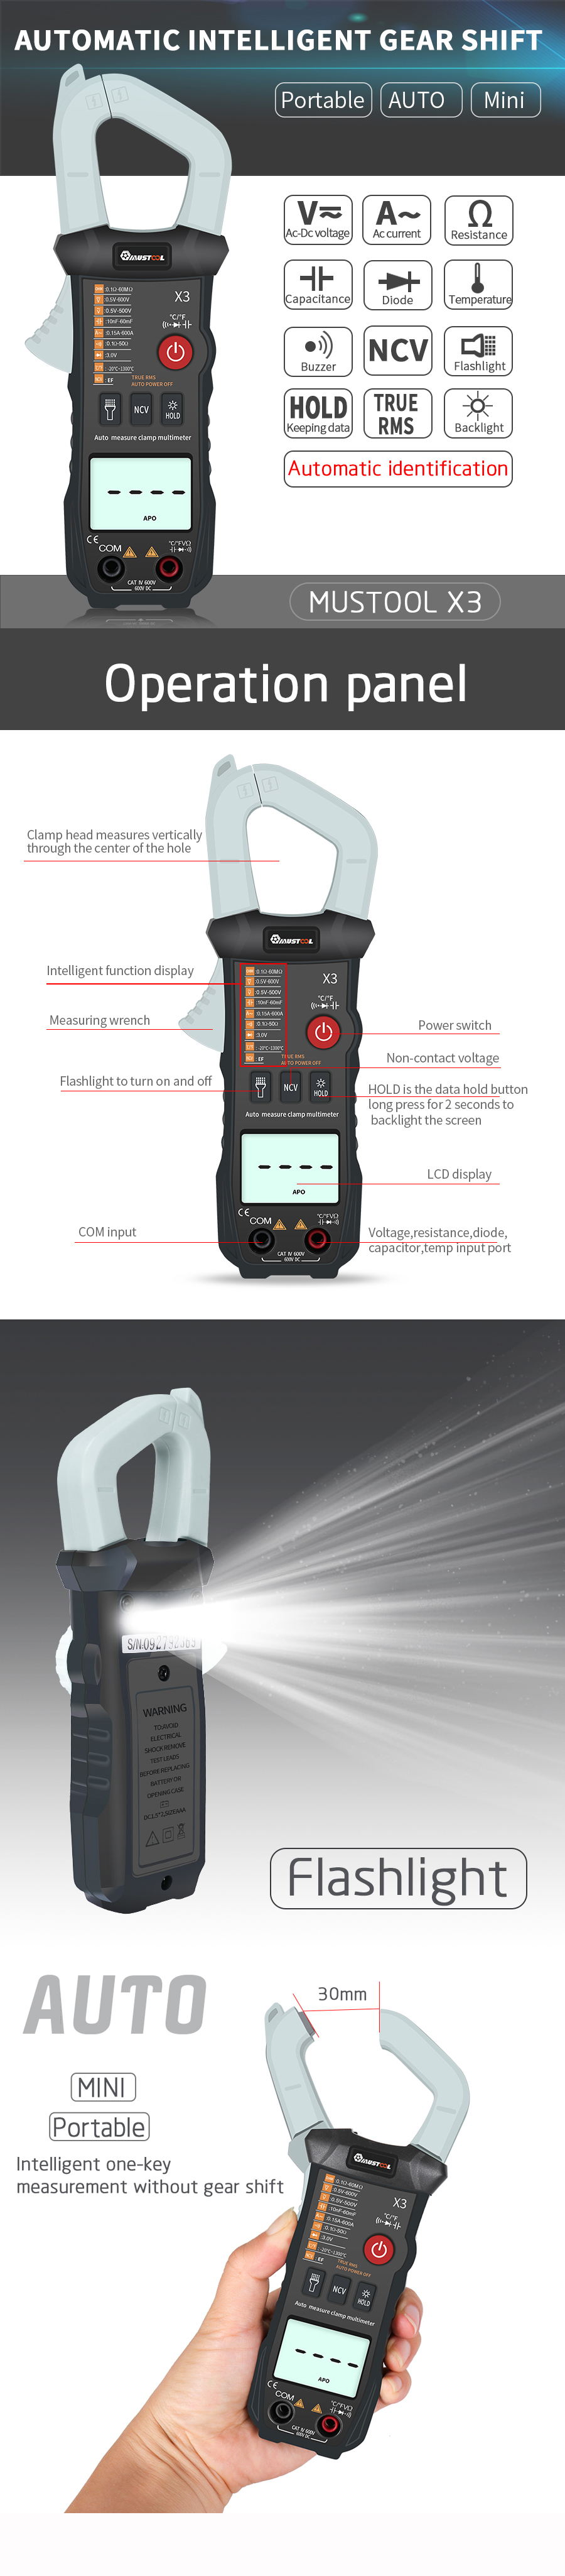 MUSTOOL-X3-Fully-Intelligent-True-RMS-Clamp-Meter-6000-Counts-Automatic-Identification-Digital-Multi-1953086-1